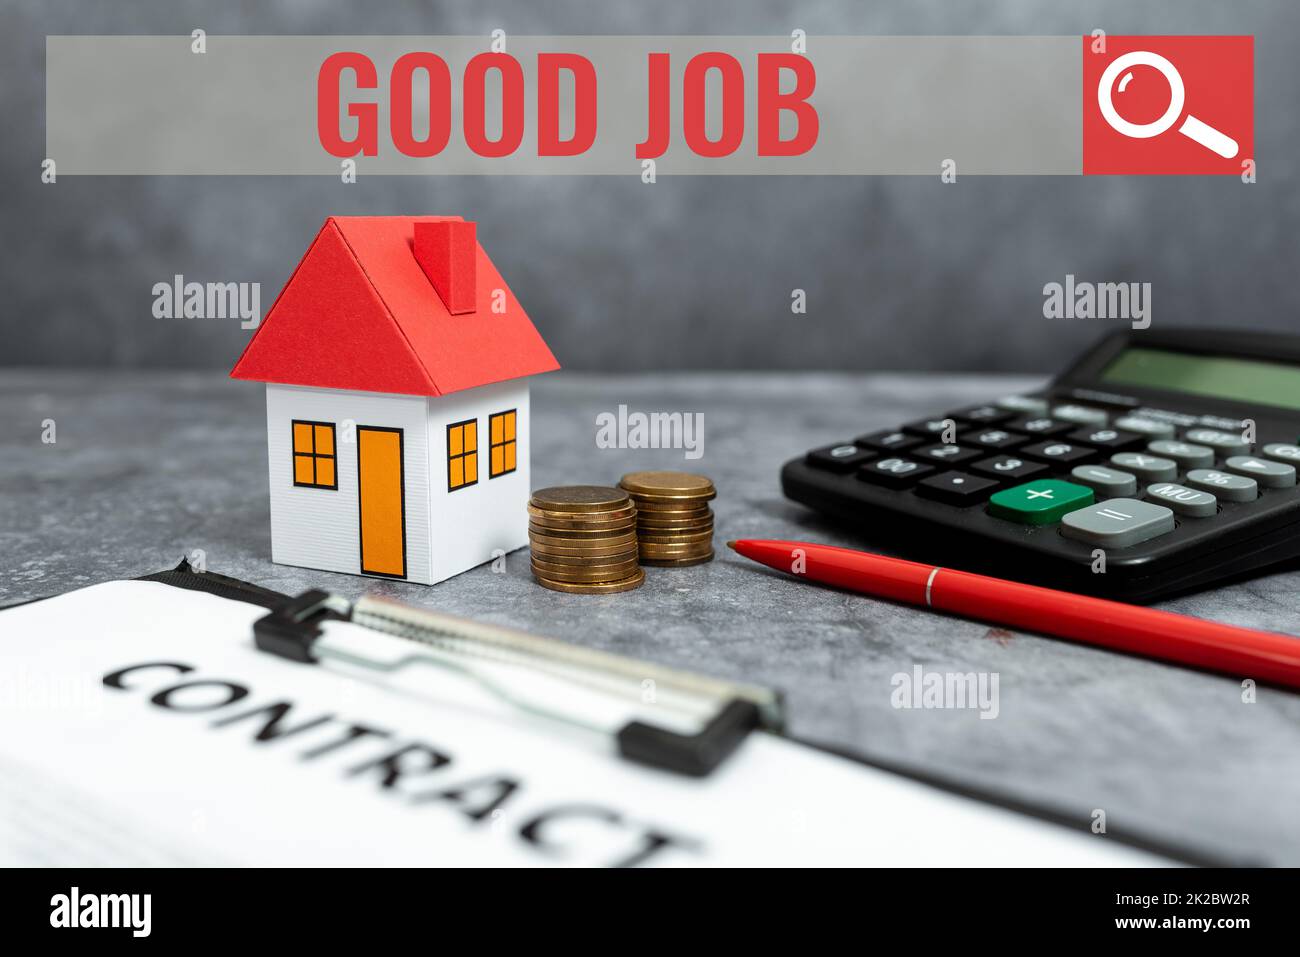 Conceptual caption Good Job. Business showcase used for praising someone for something they have done well Buying New House Ideas, Property Insurance Contract,Home Sale Deal Stock Photo